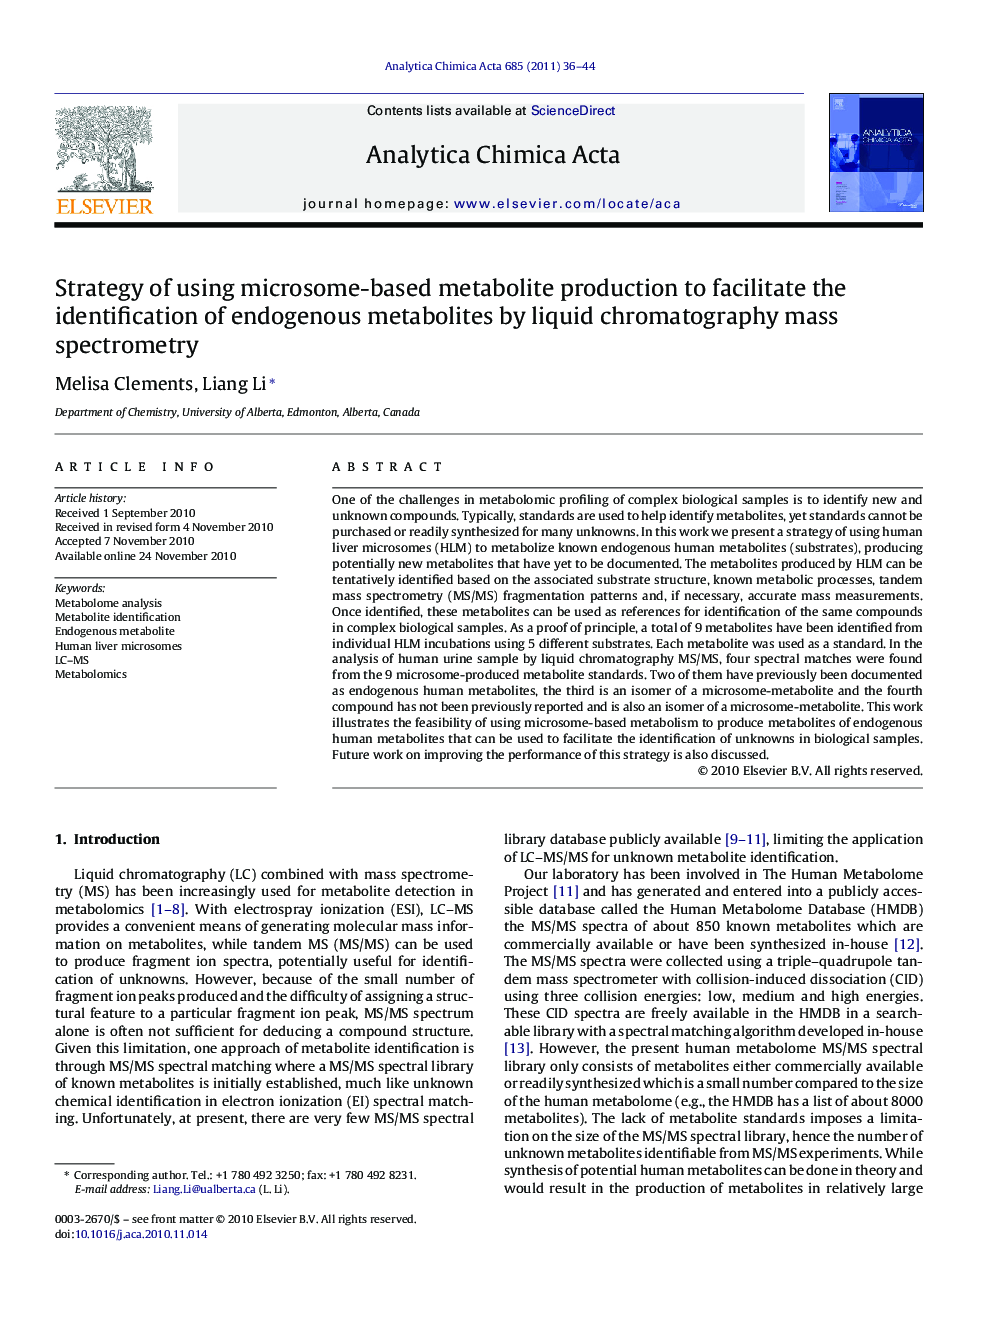 Strategy of using microsome-based metabolite production to facilitate the identification of endogenous metabolites by liquid chromatography mass spectrometry